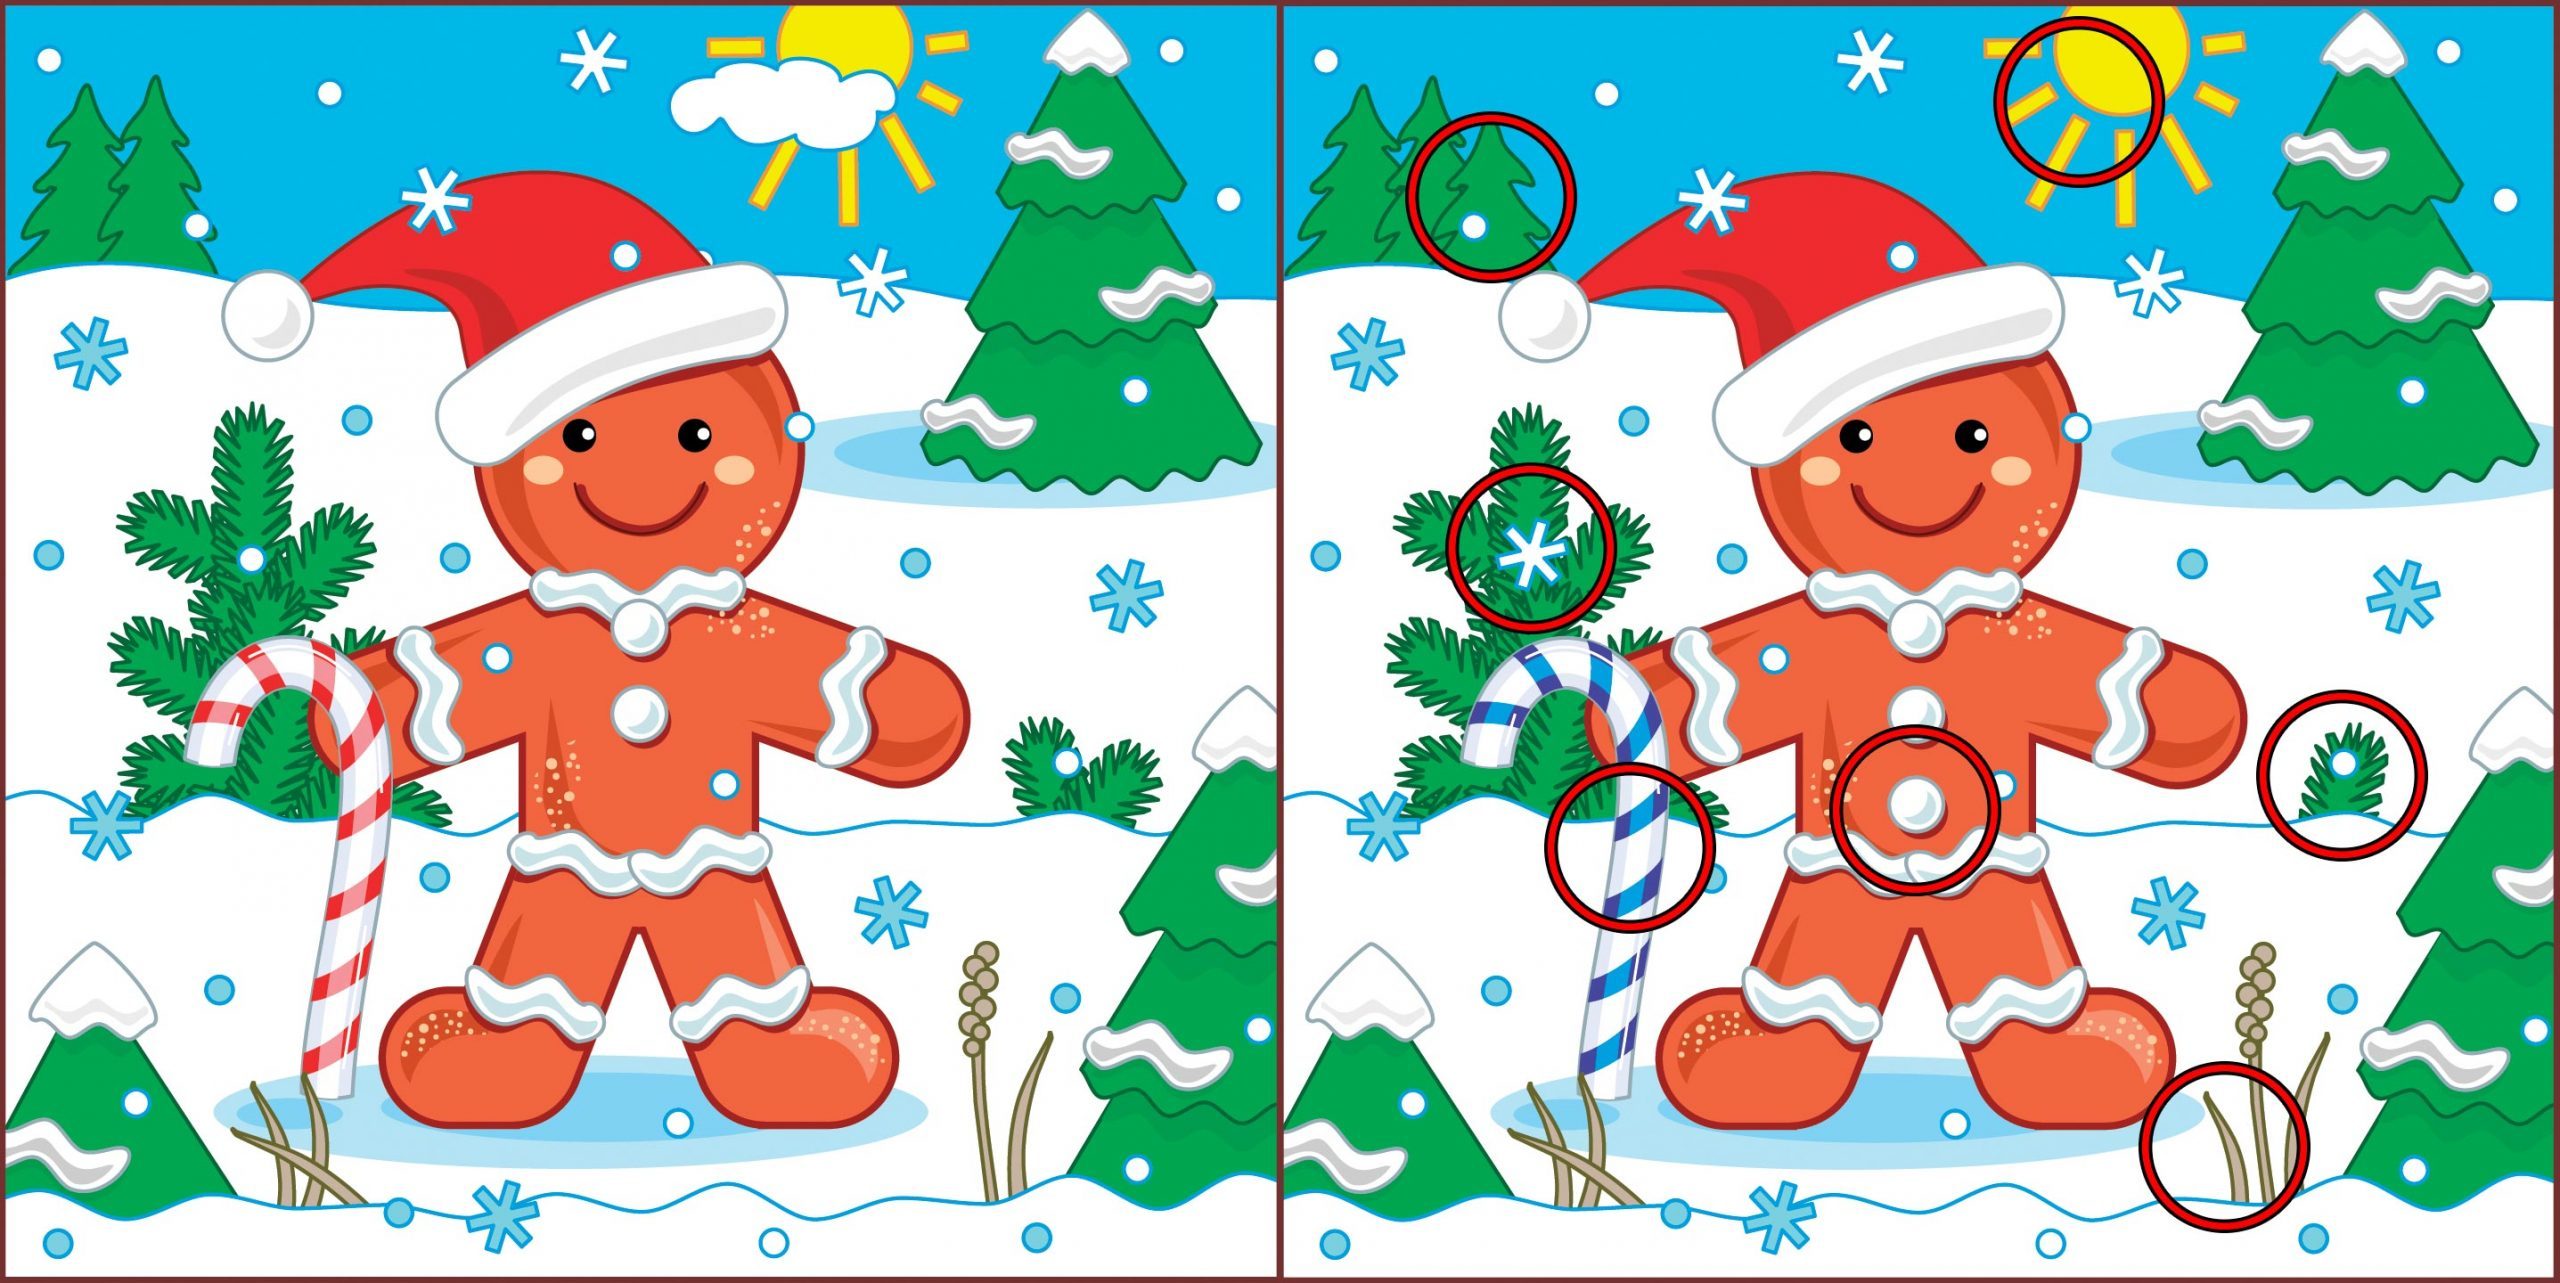  New Year or Christmas visual puzzle: Find the seven differences between the two pictures with ginger man. Answer included. 